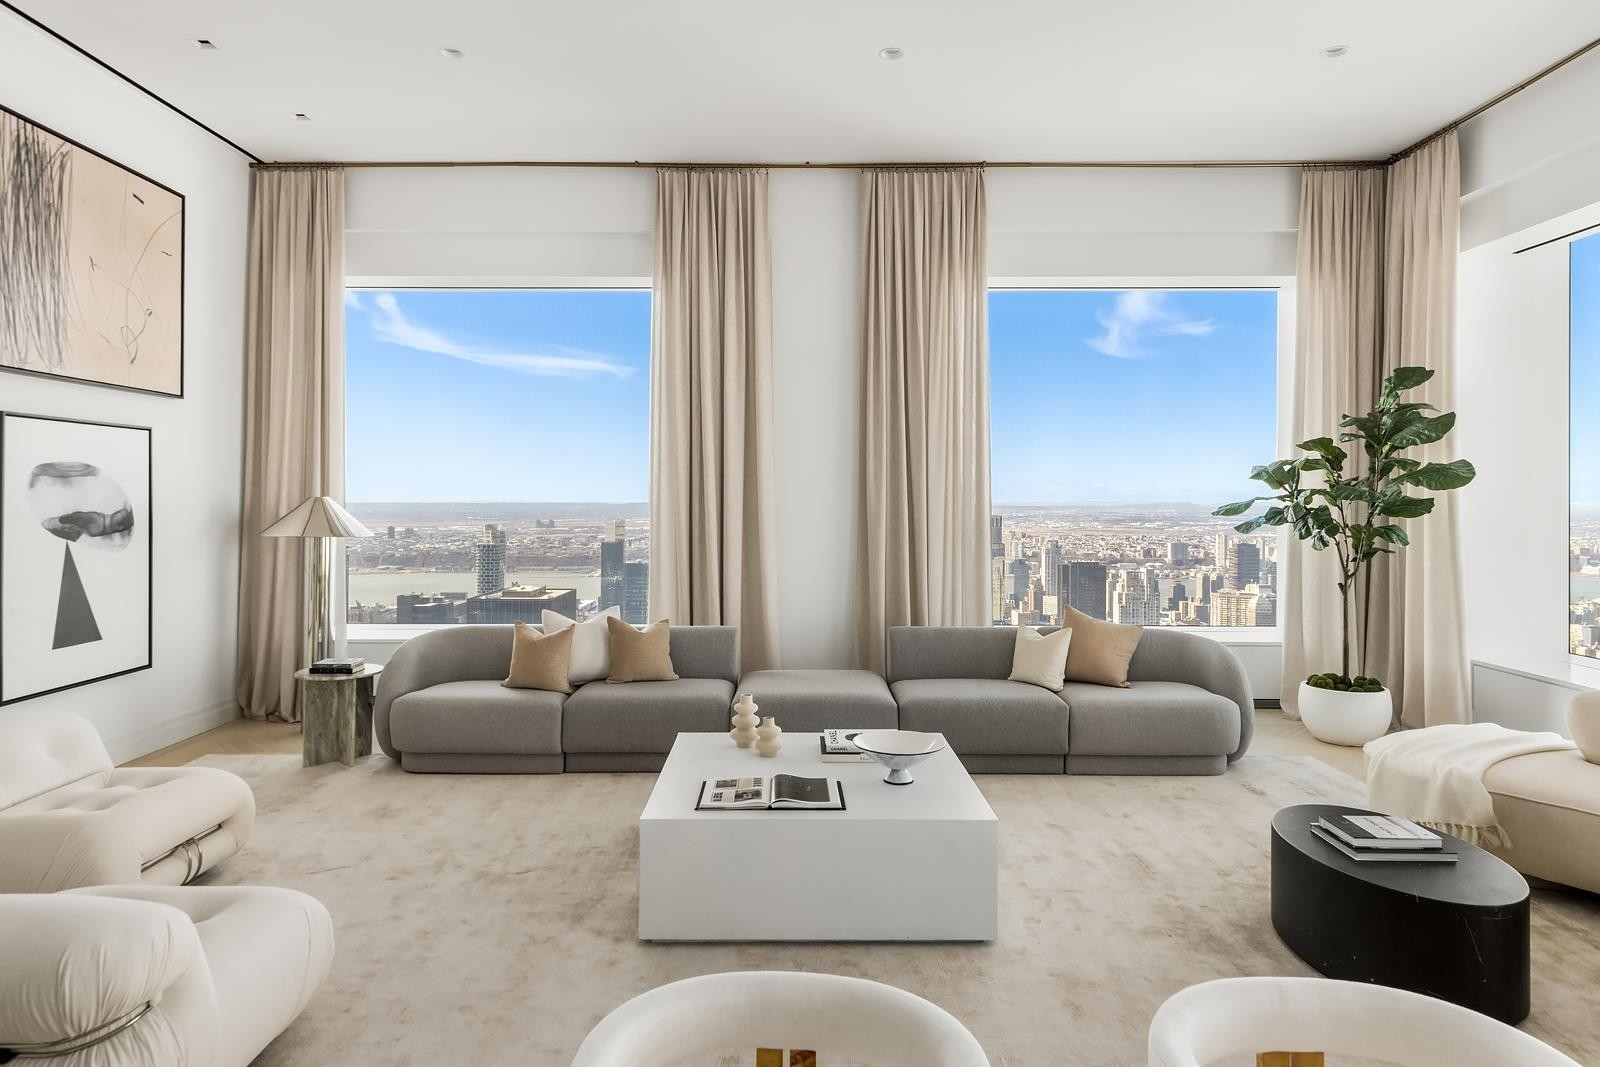 Property at 432 PARK AVE, 66B Midtown East, New York, New York 10022